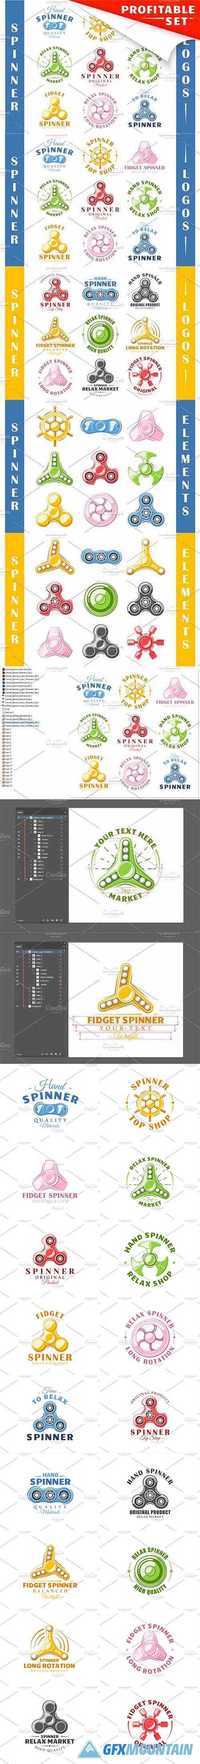 18 COLORED SPINNER LOGOS TEMPLATES 1663445